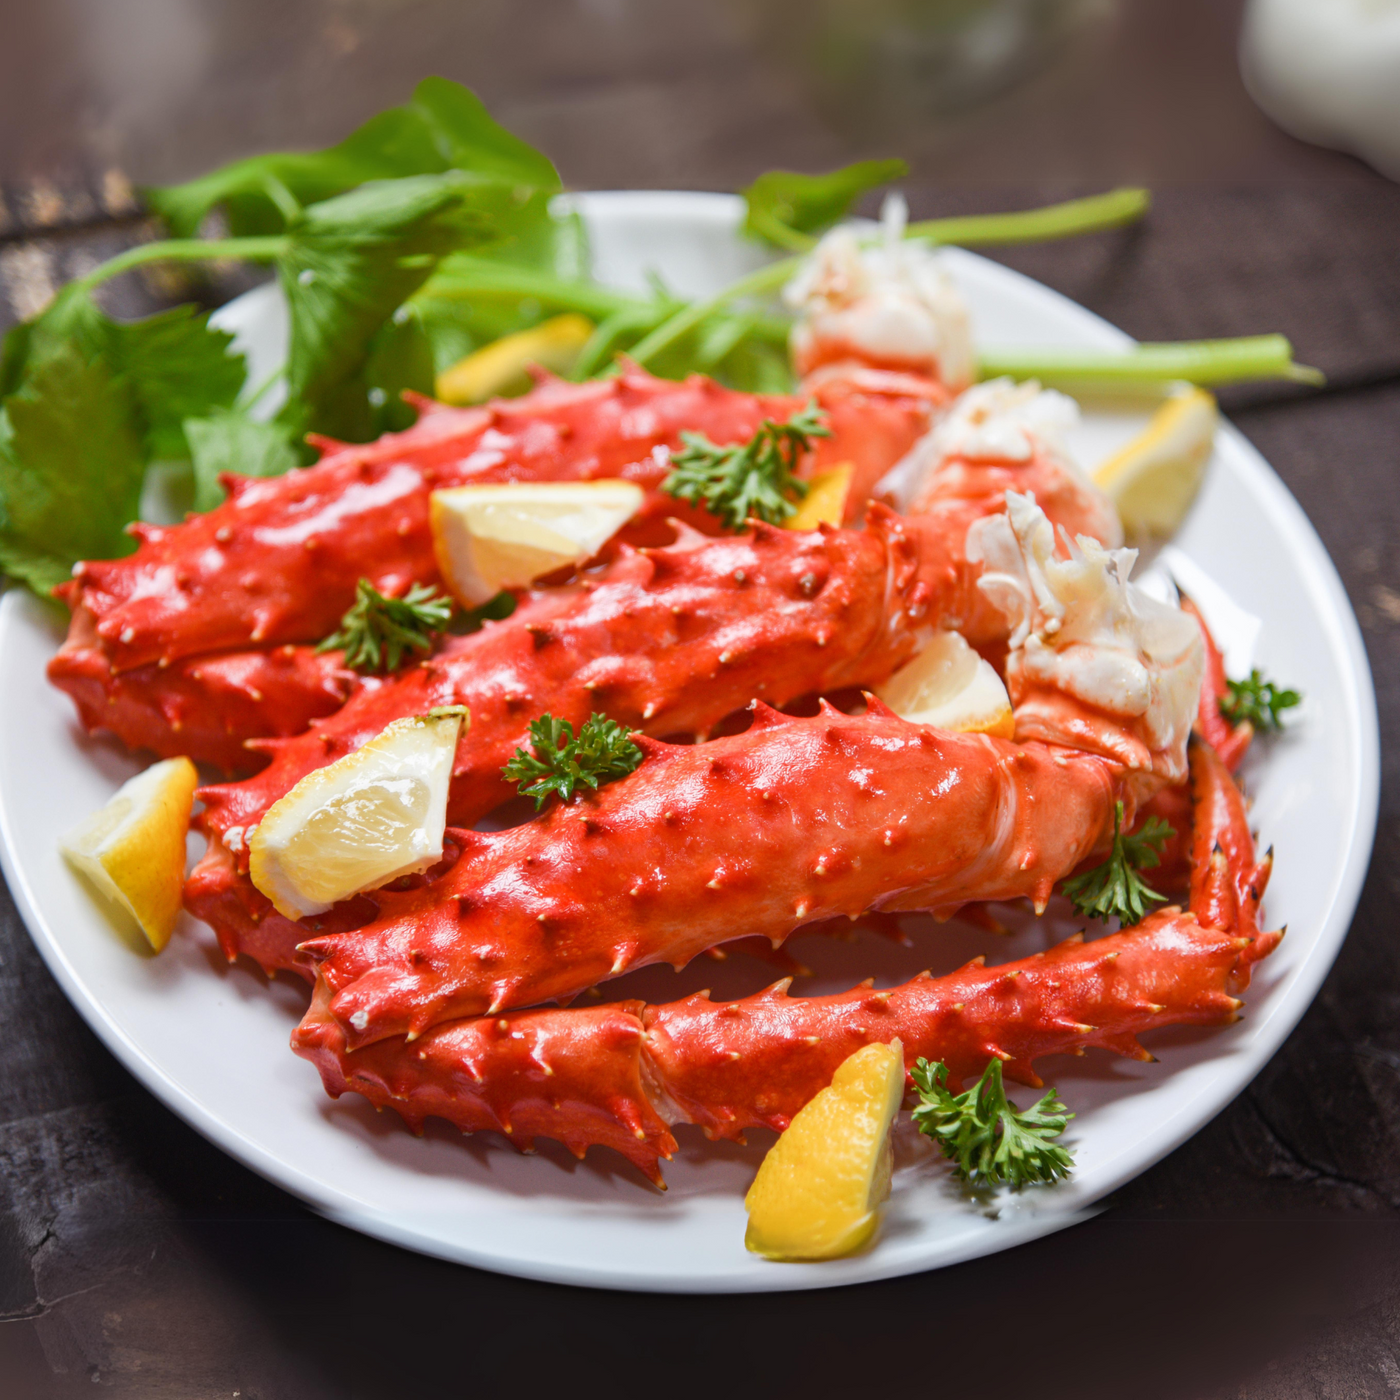 Live Norwegian Red King Crab 6lbs